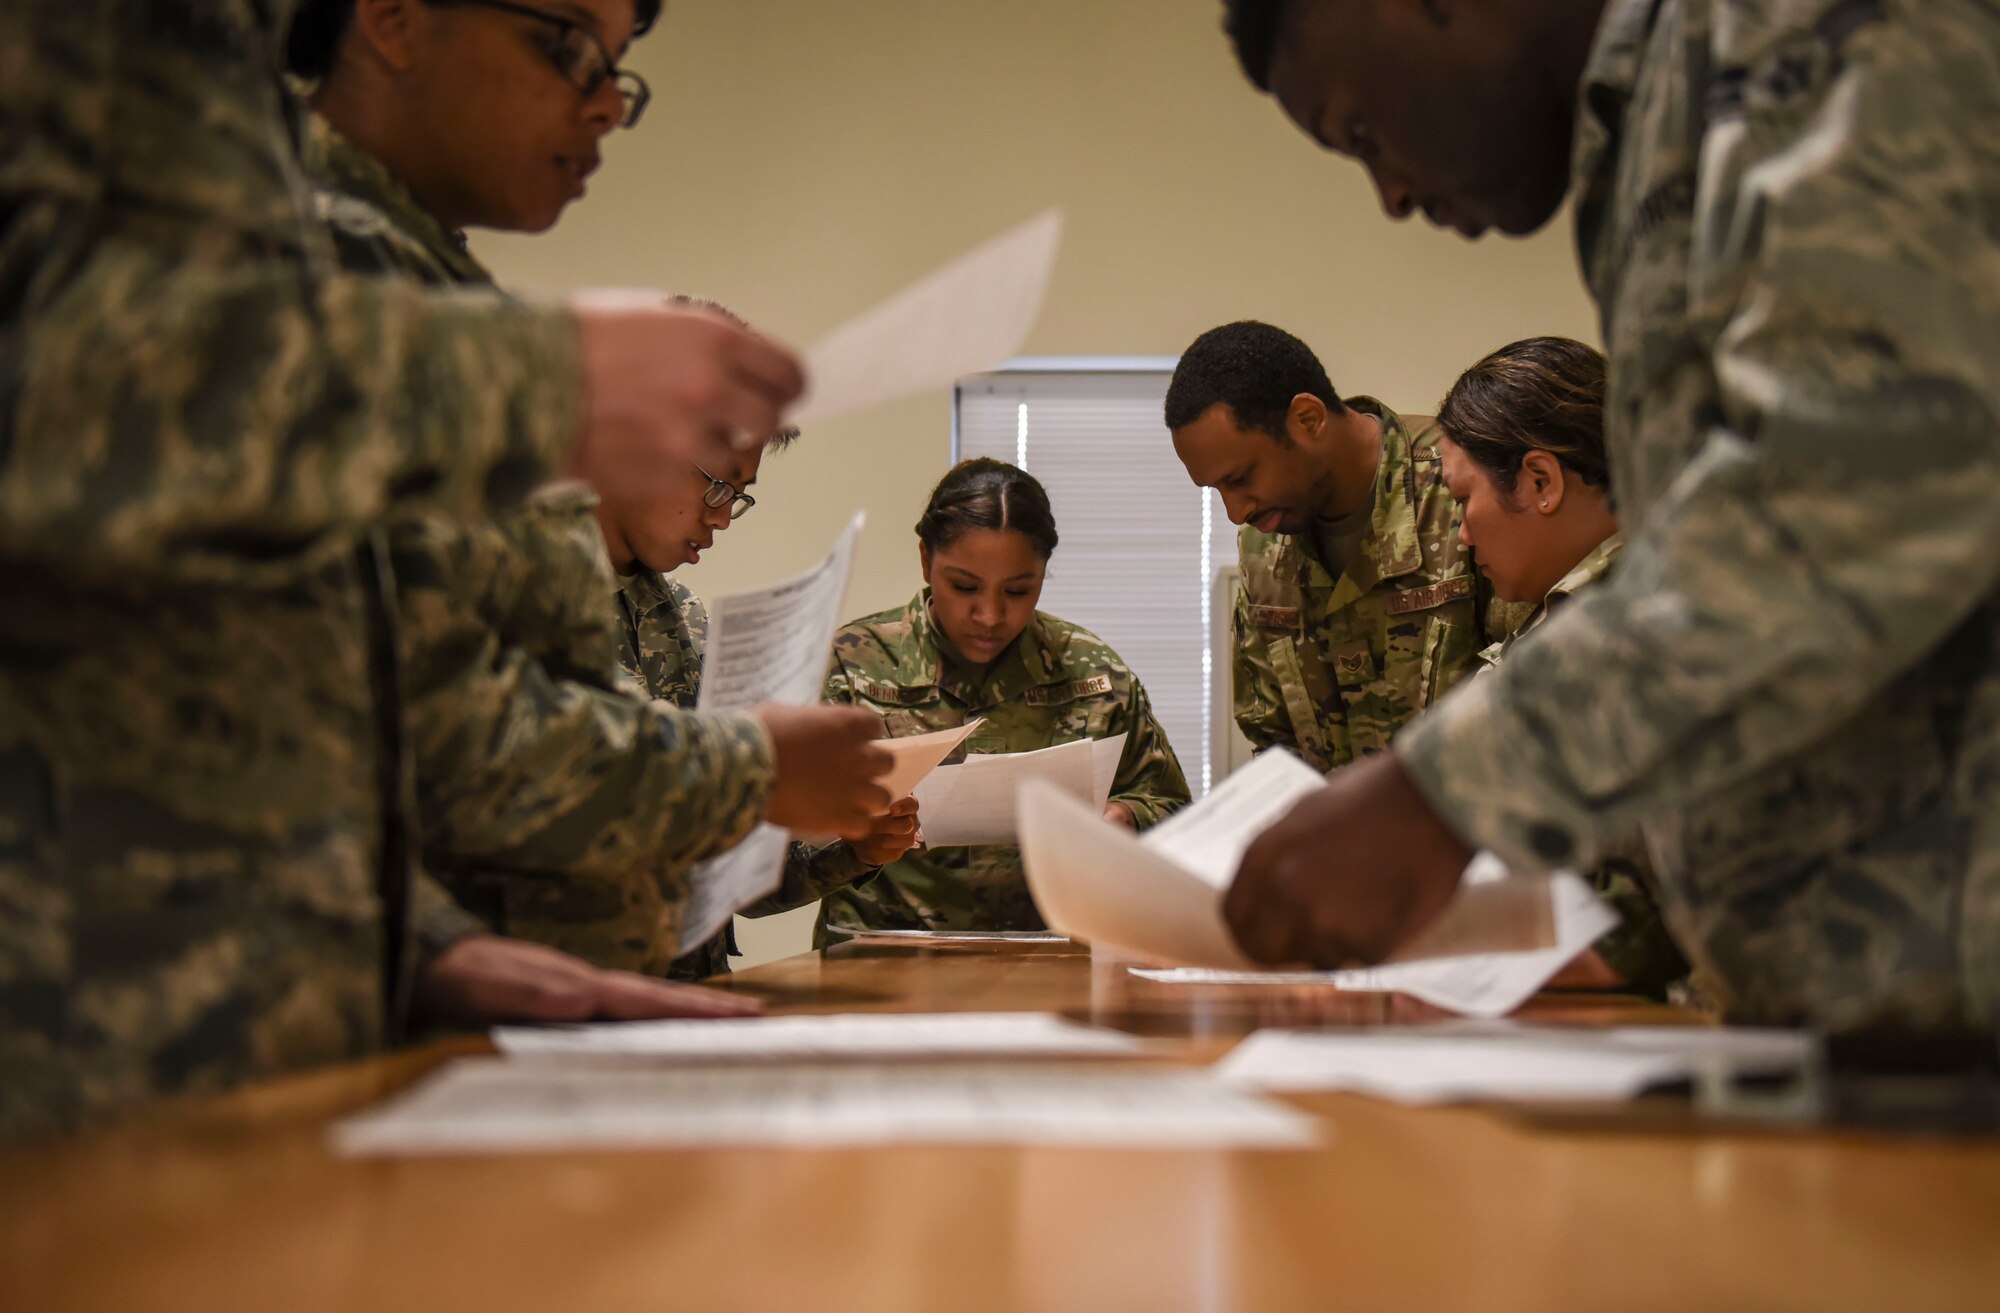 Members of Team Fairchild check paperwork for incoming personnel participating in Exercise Mobility Guardian 2019 at Fairchild Air Force Base, Washington, Aug 16, 2019.